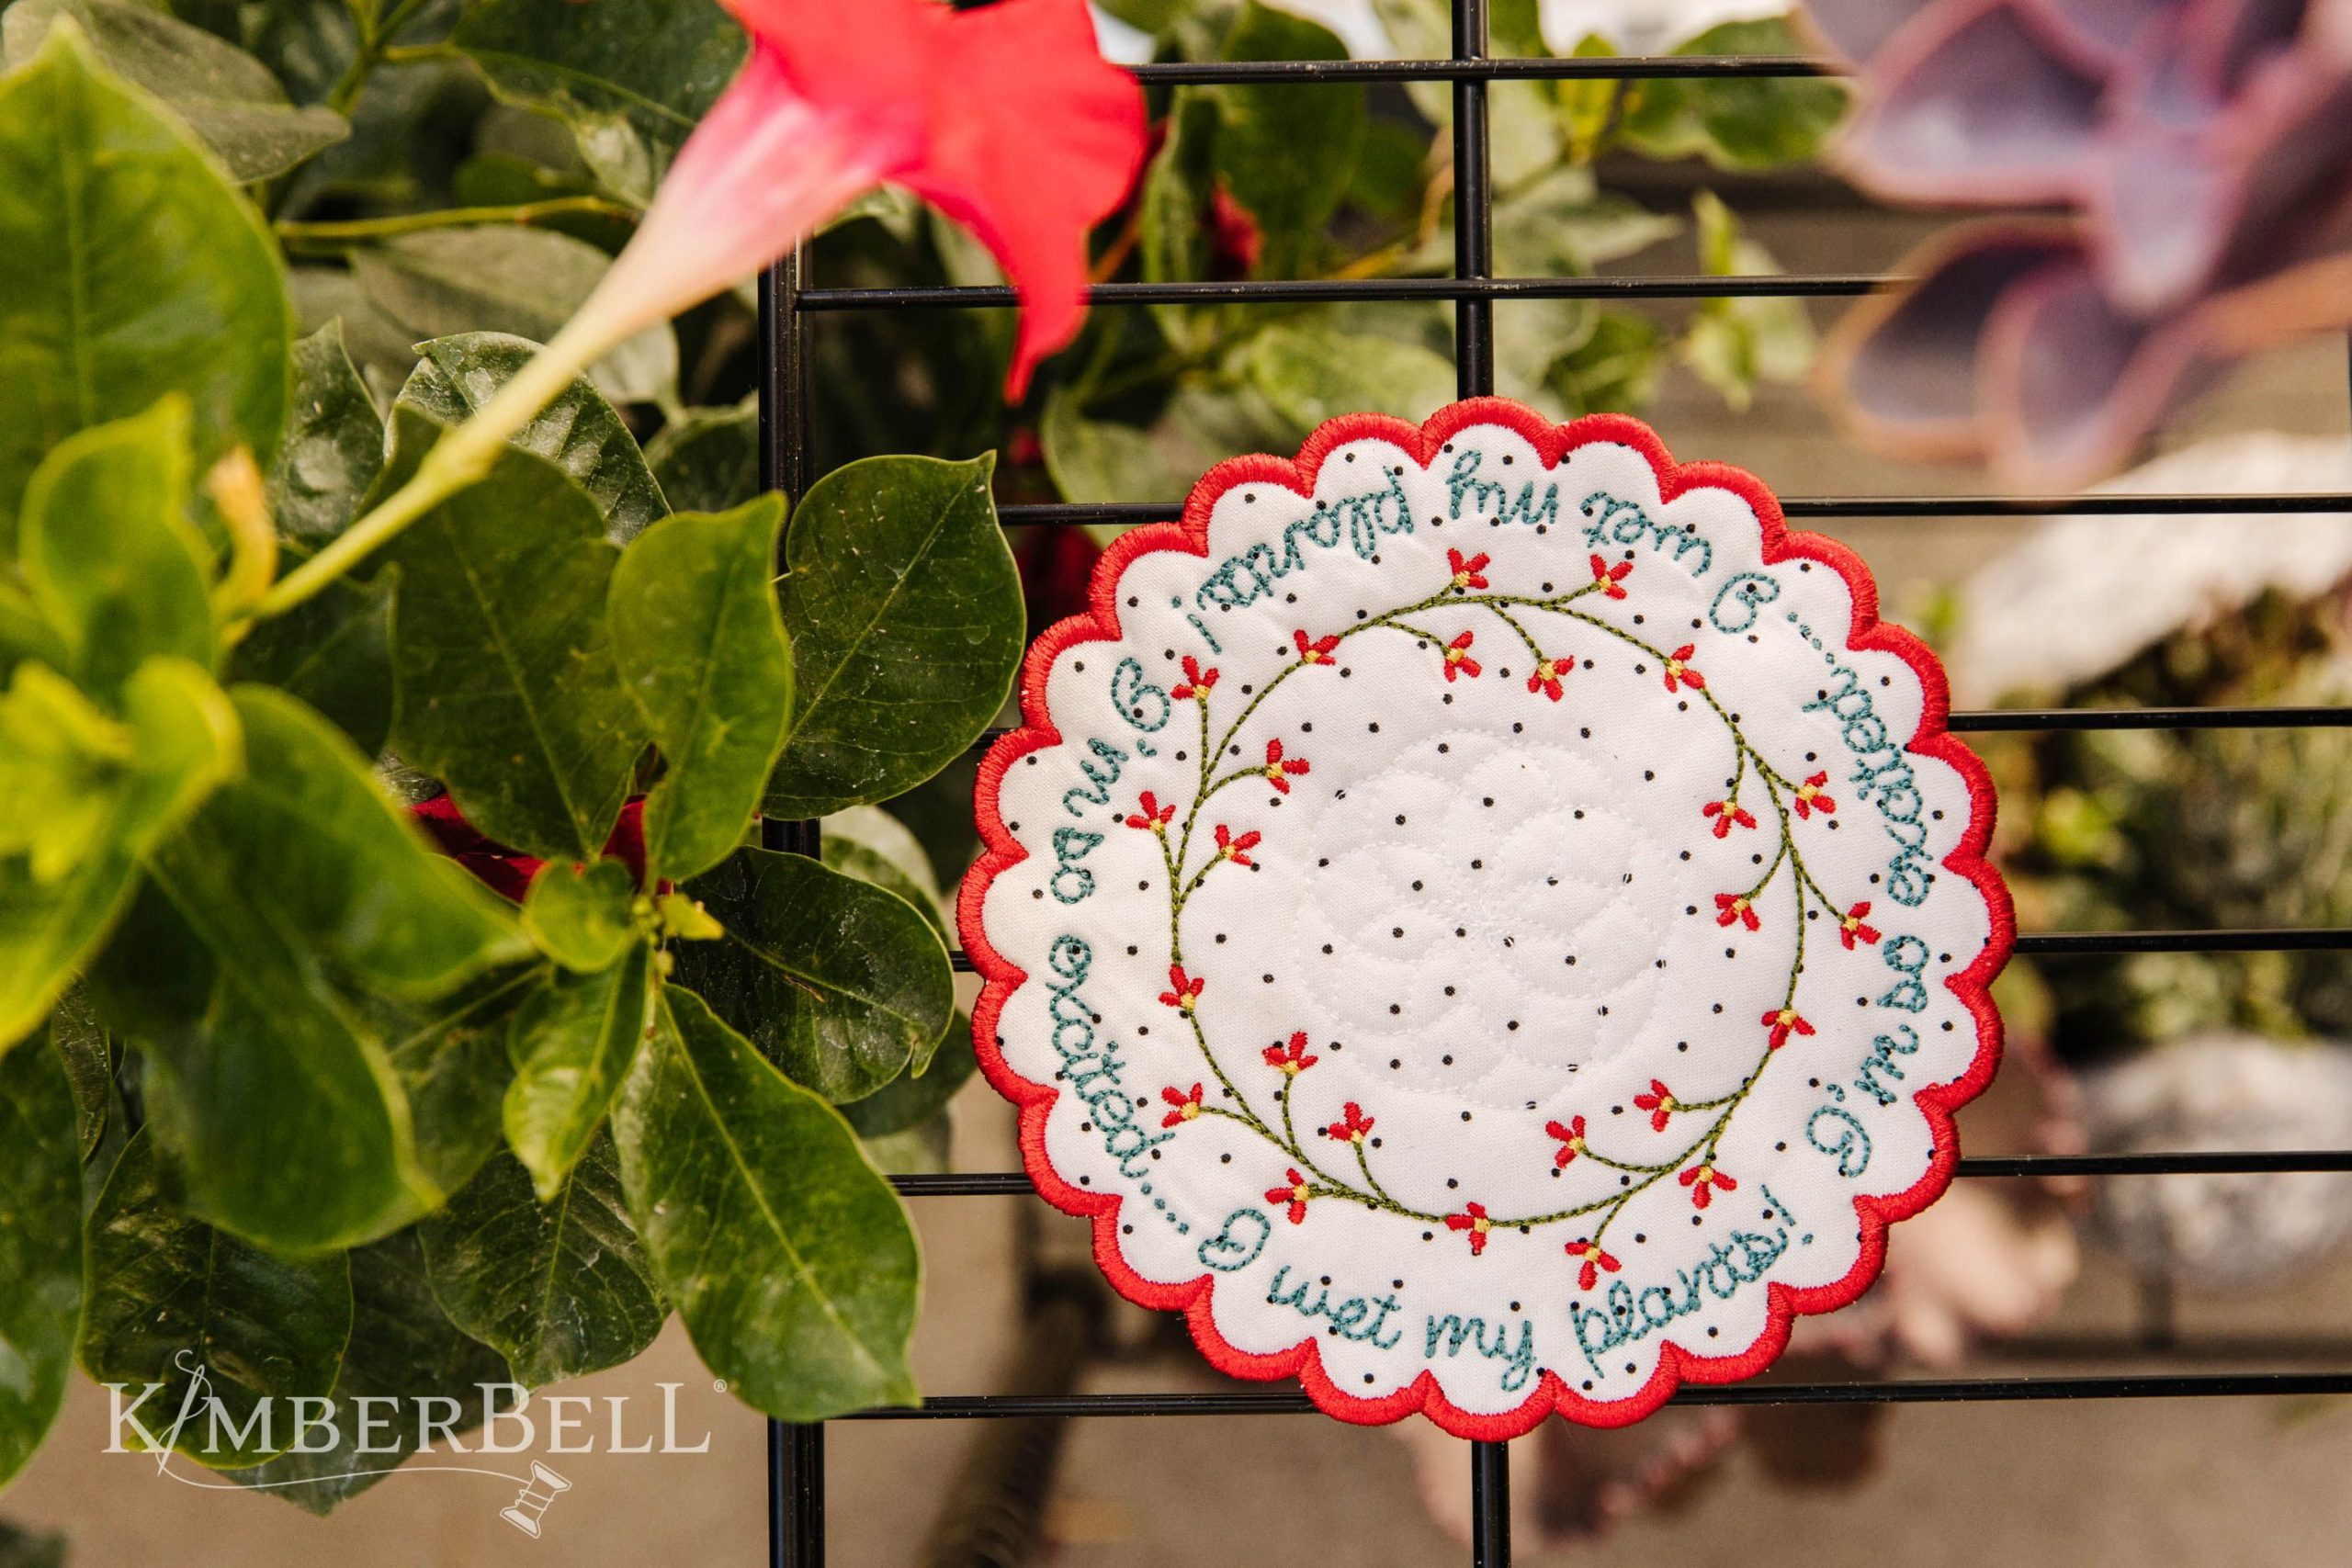 The Garden Guild One-Day Machine Embroidery Event from Kimberbell